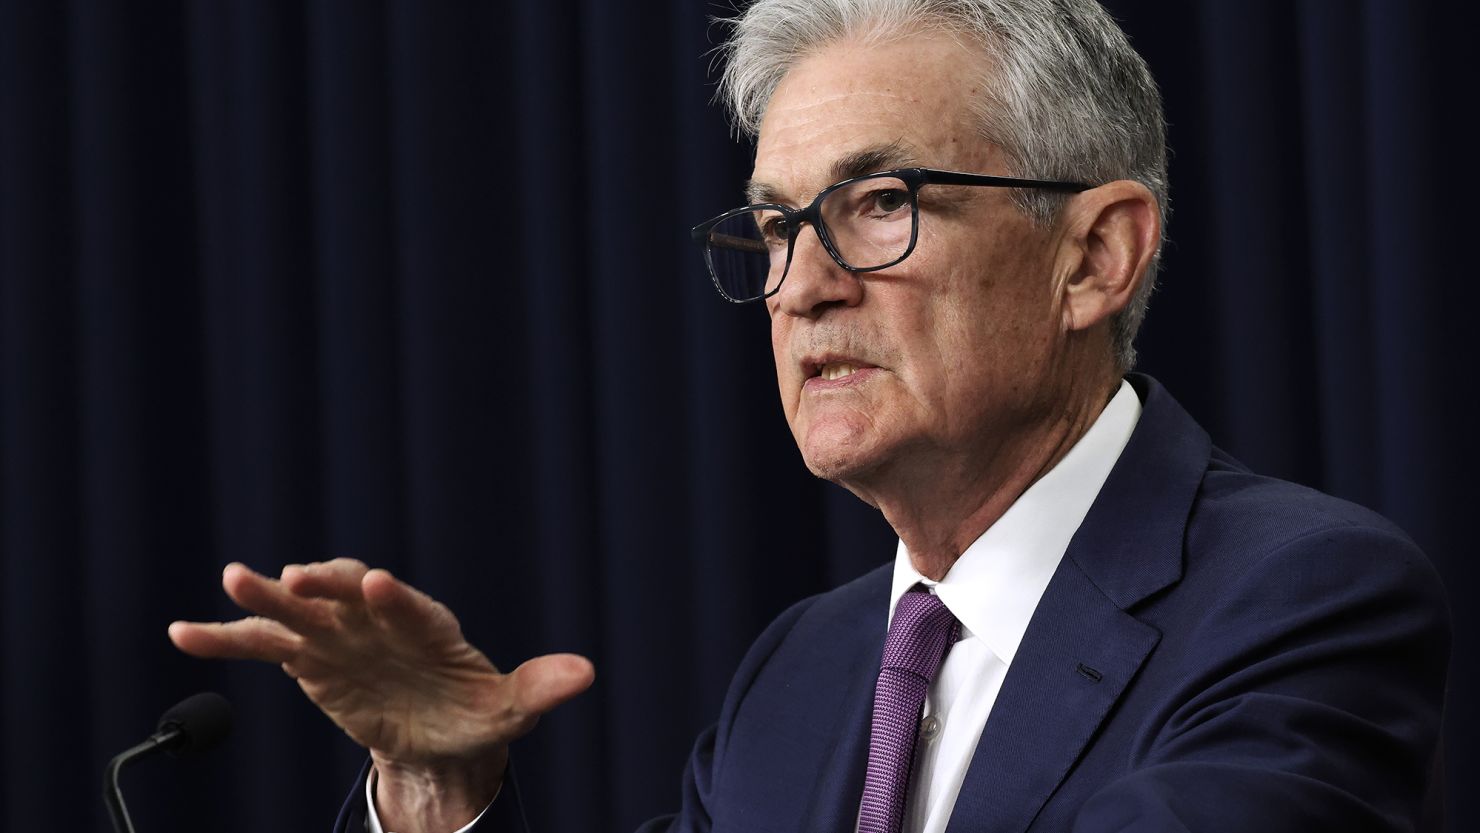 Federal Reserve officials' meeting kicks off on Tuesday. They're widely expected to keep interest rates at current levels as inflation remains stubborn.